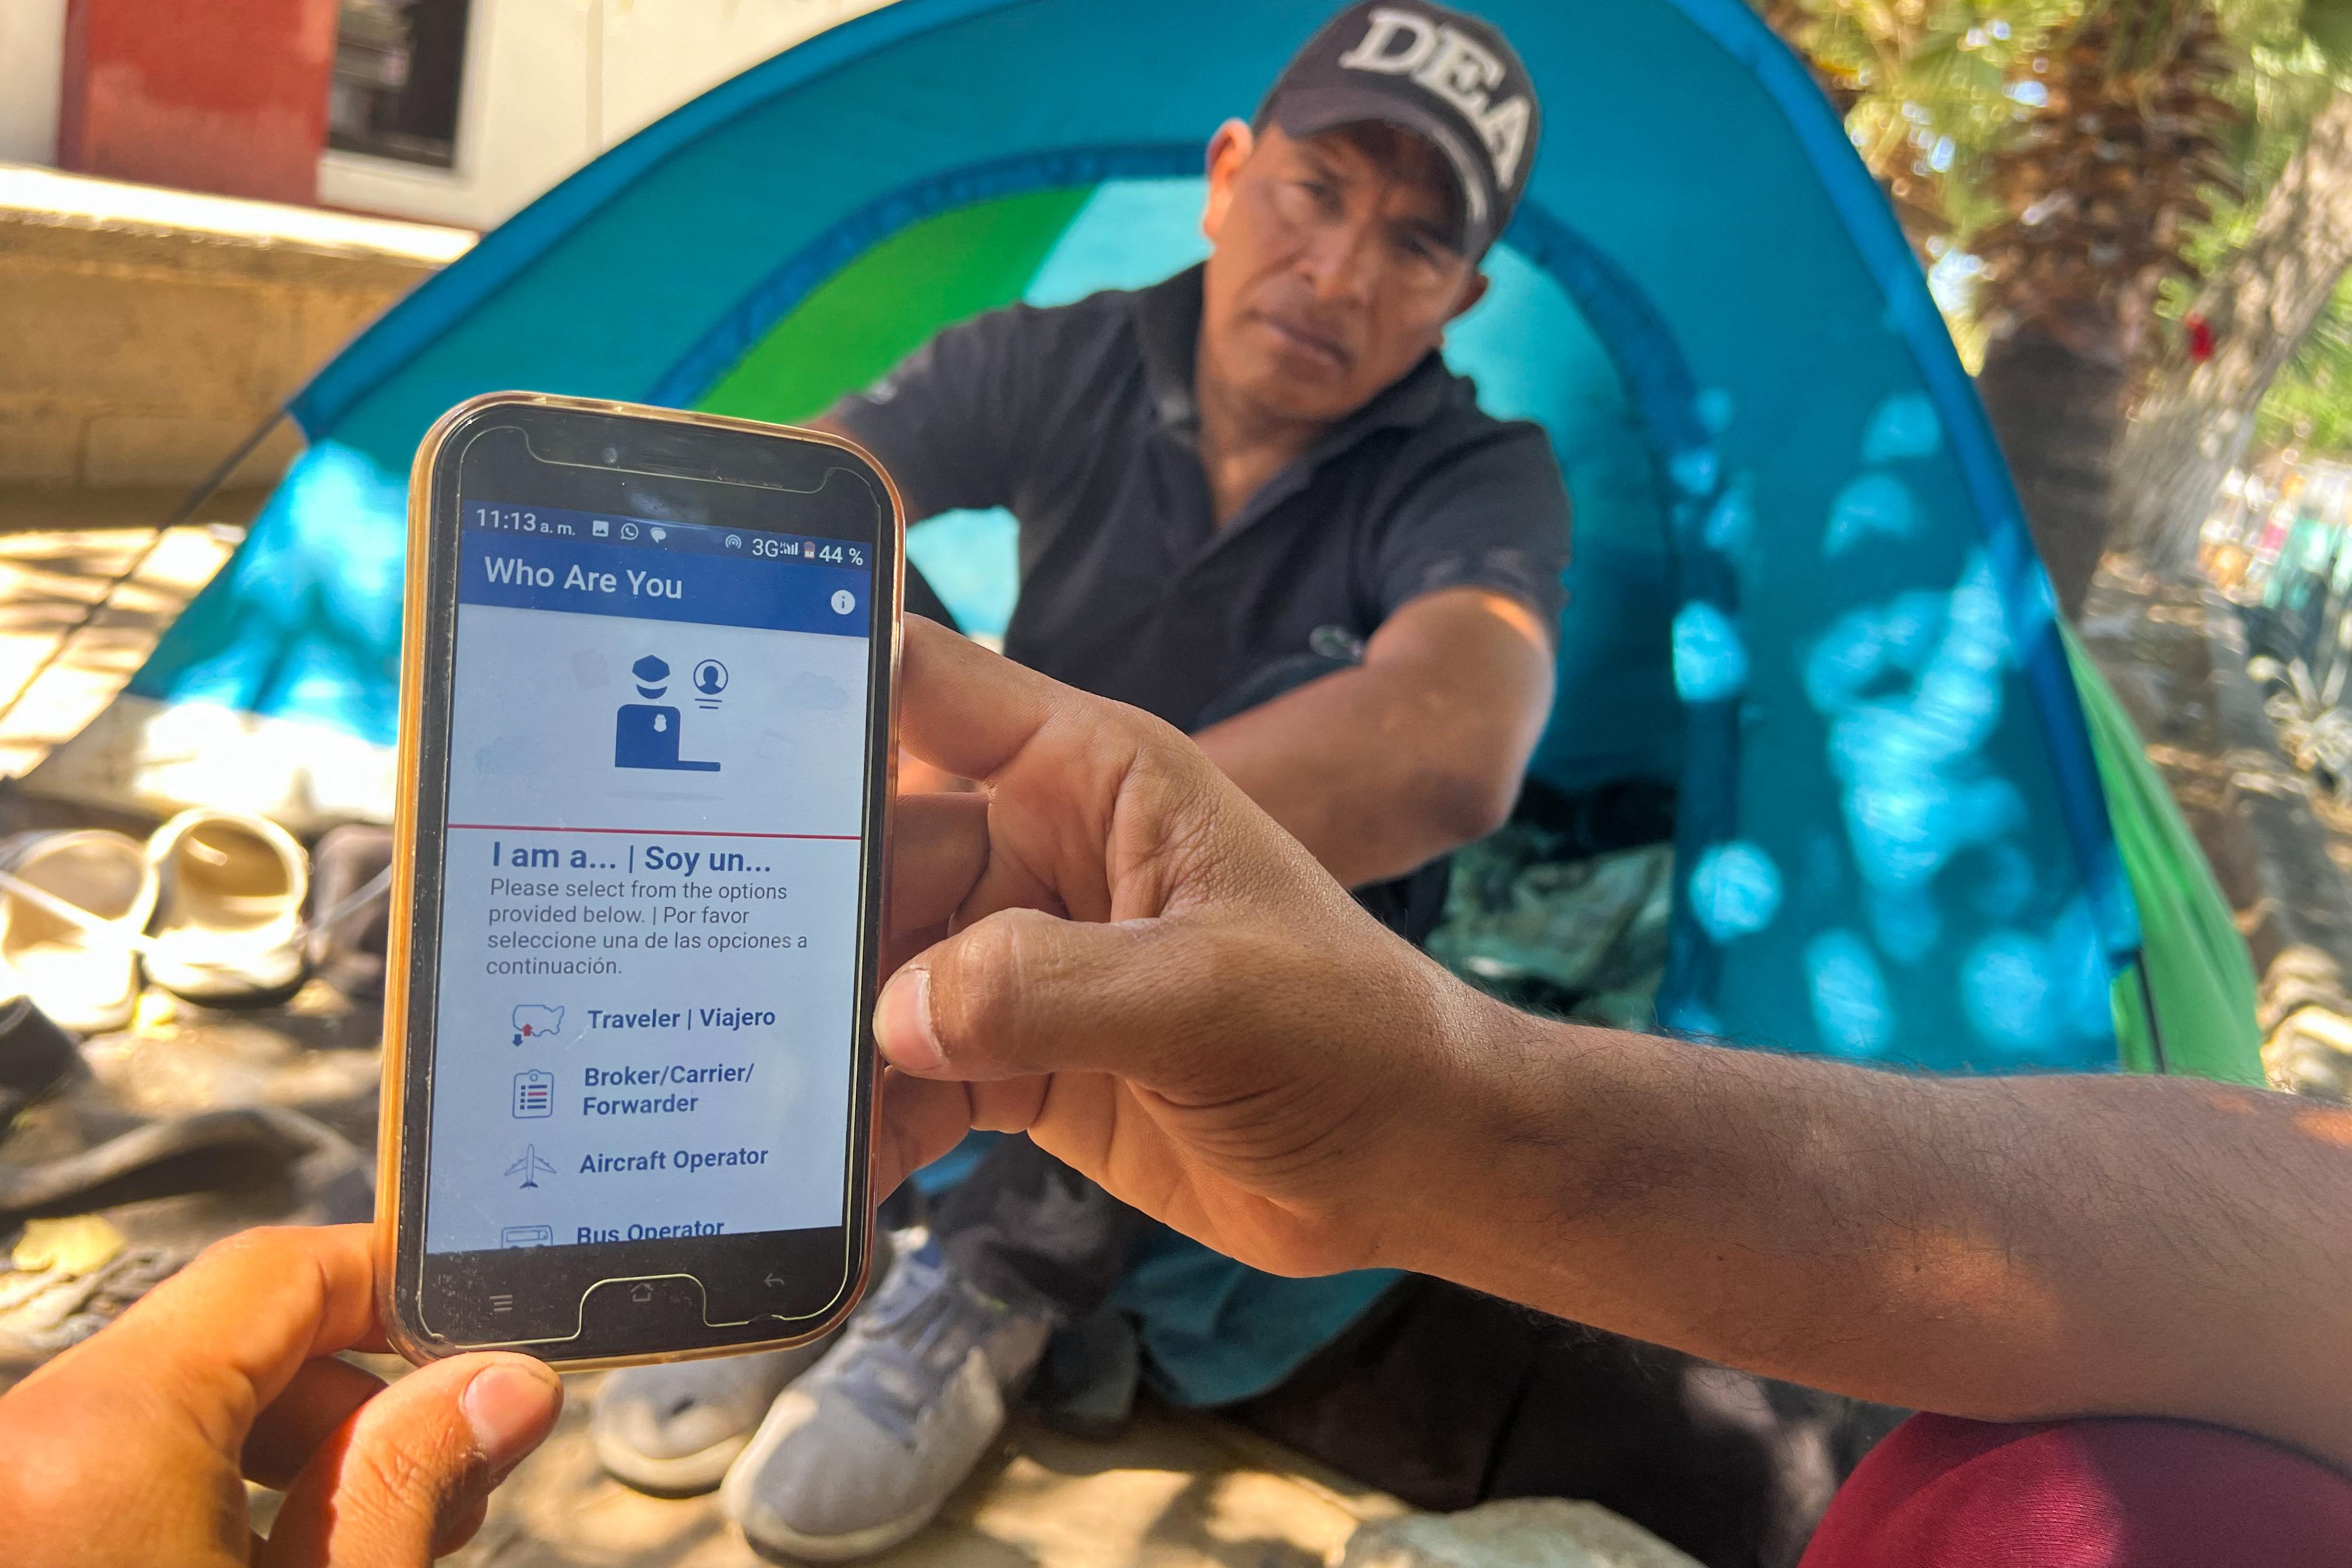 A DEA agent sitting in front of a tent stares skeptically at a person. All you can see of that person is one arm and a second hand holding up a phone with an app reading "WHO ARE YOU."